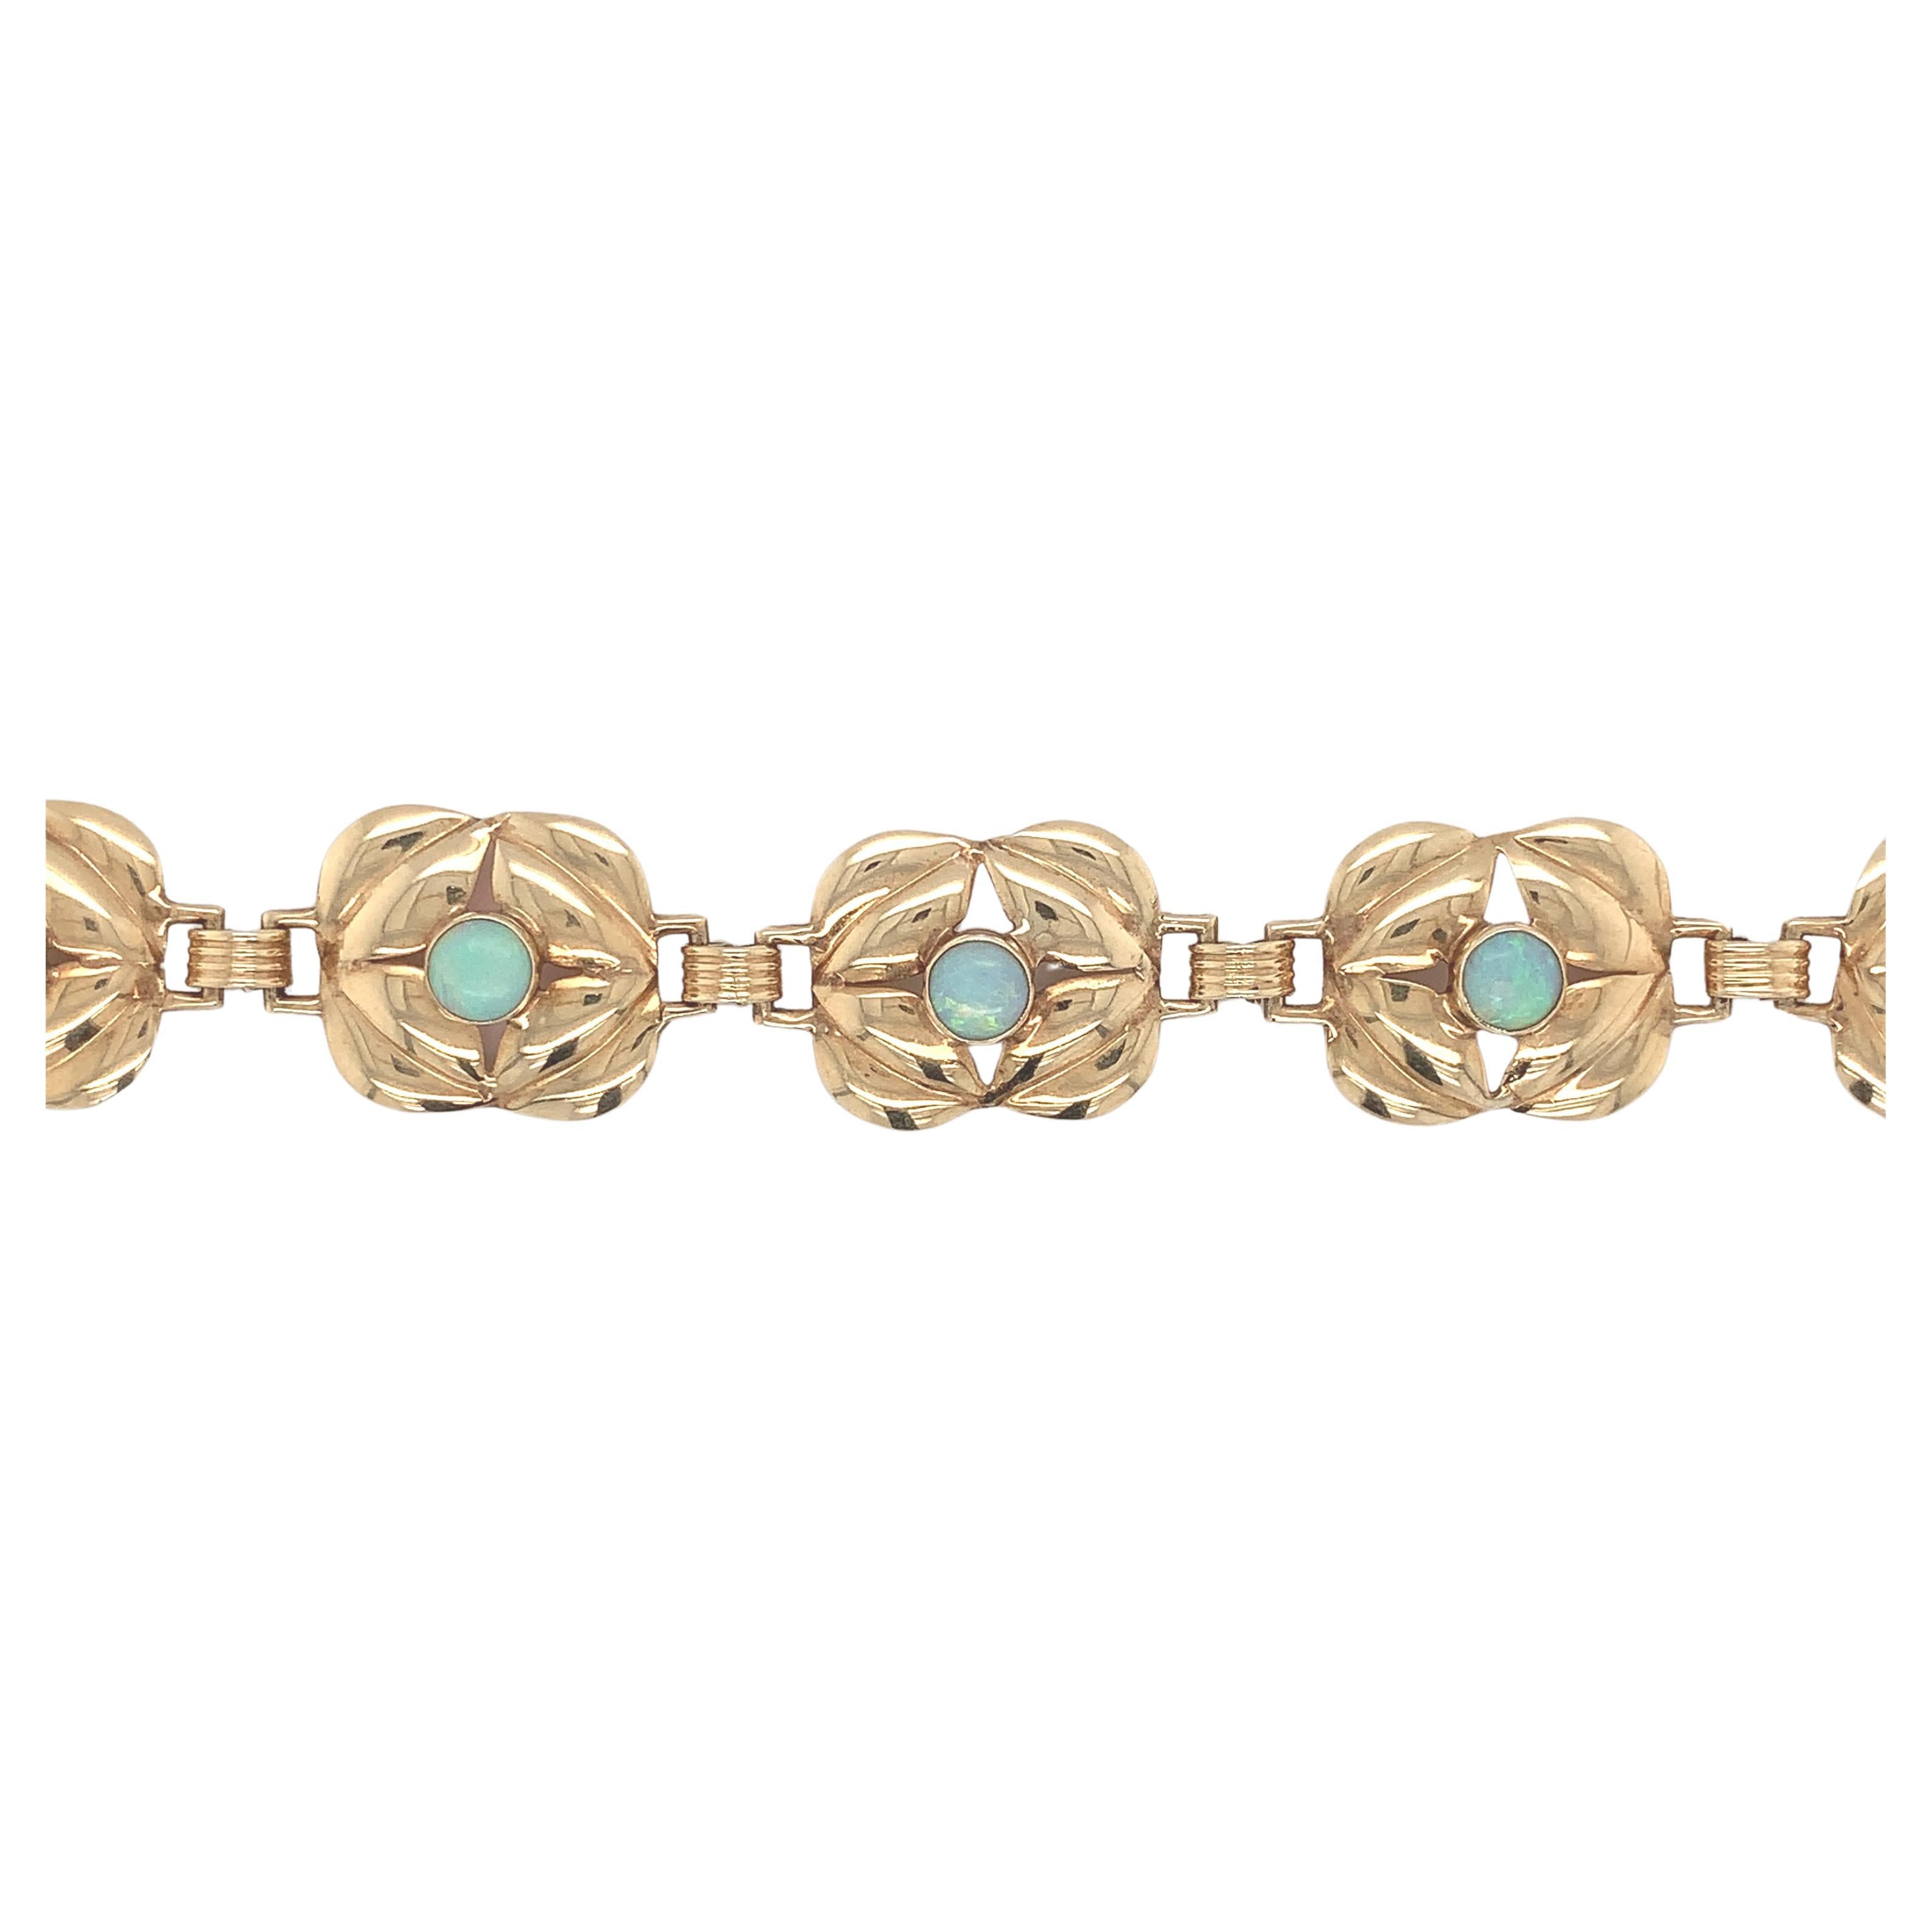 Retro 14K Yellow Gold Opal Leaf Link Bracelet with 6 Vibrant Opals